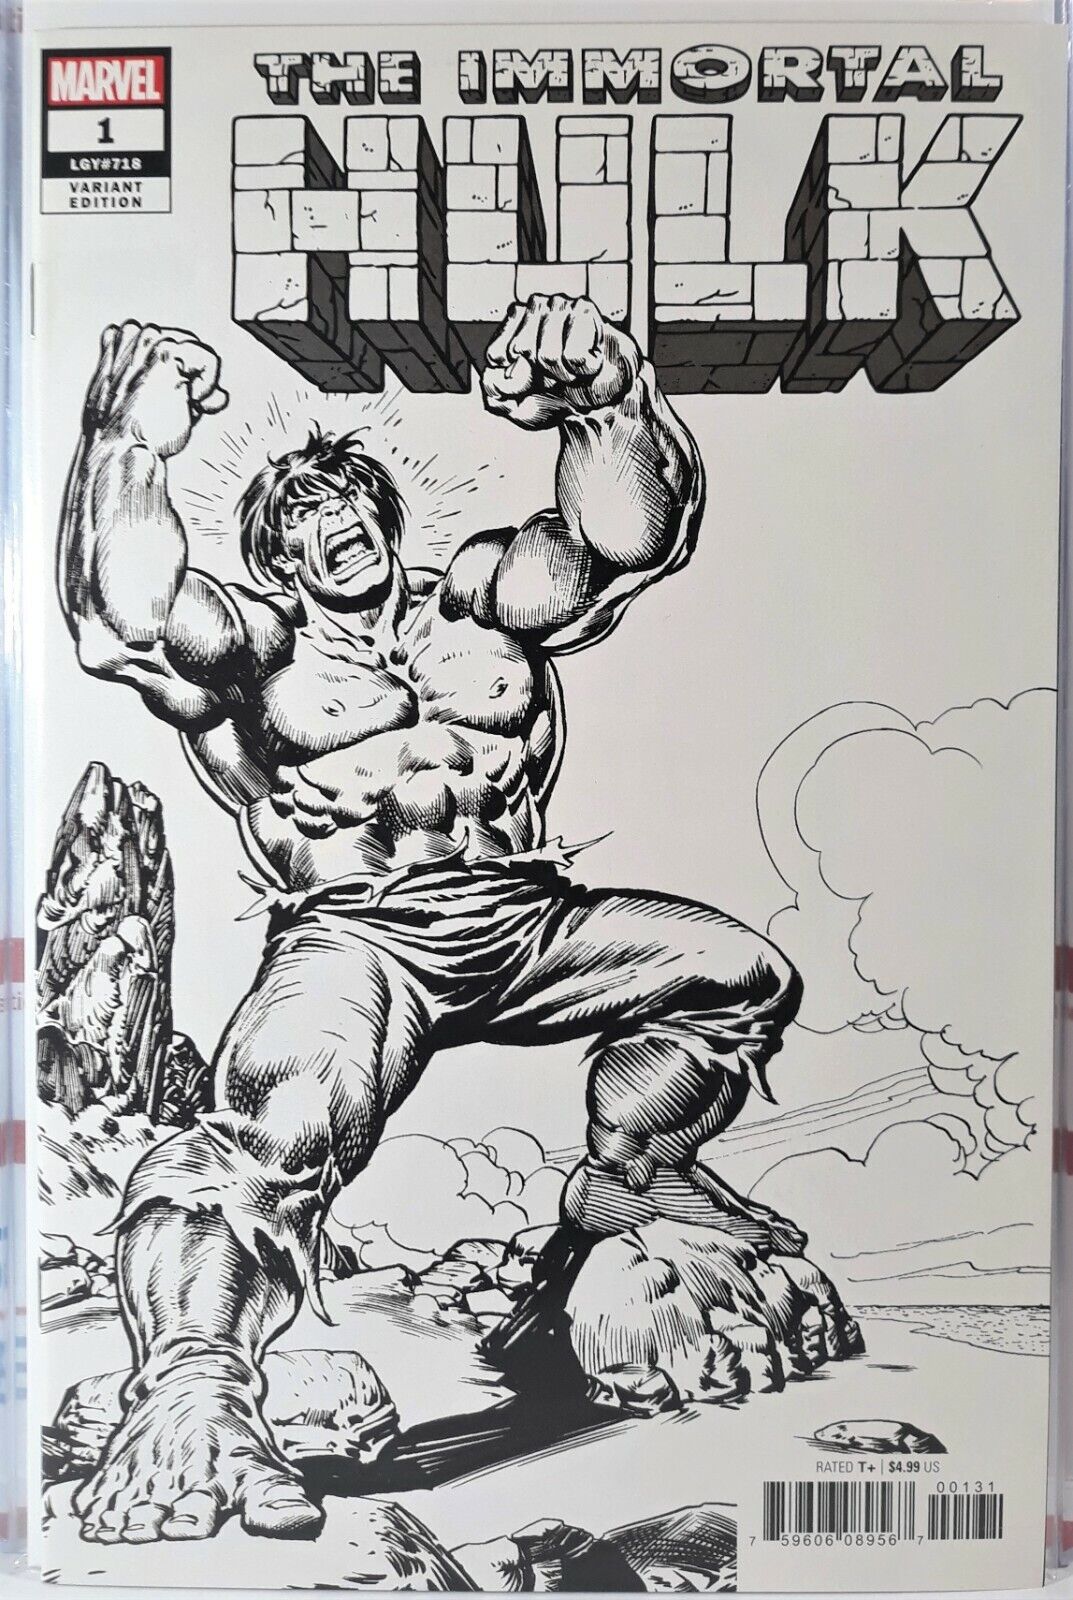 SPECIAL OFFER IMMORTAL HULK #1 NM BUSCEMA 1:1000 REMASTERED B&W SKETCH VARIANT